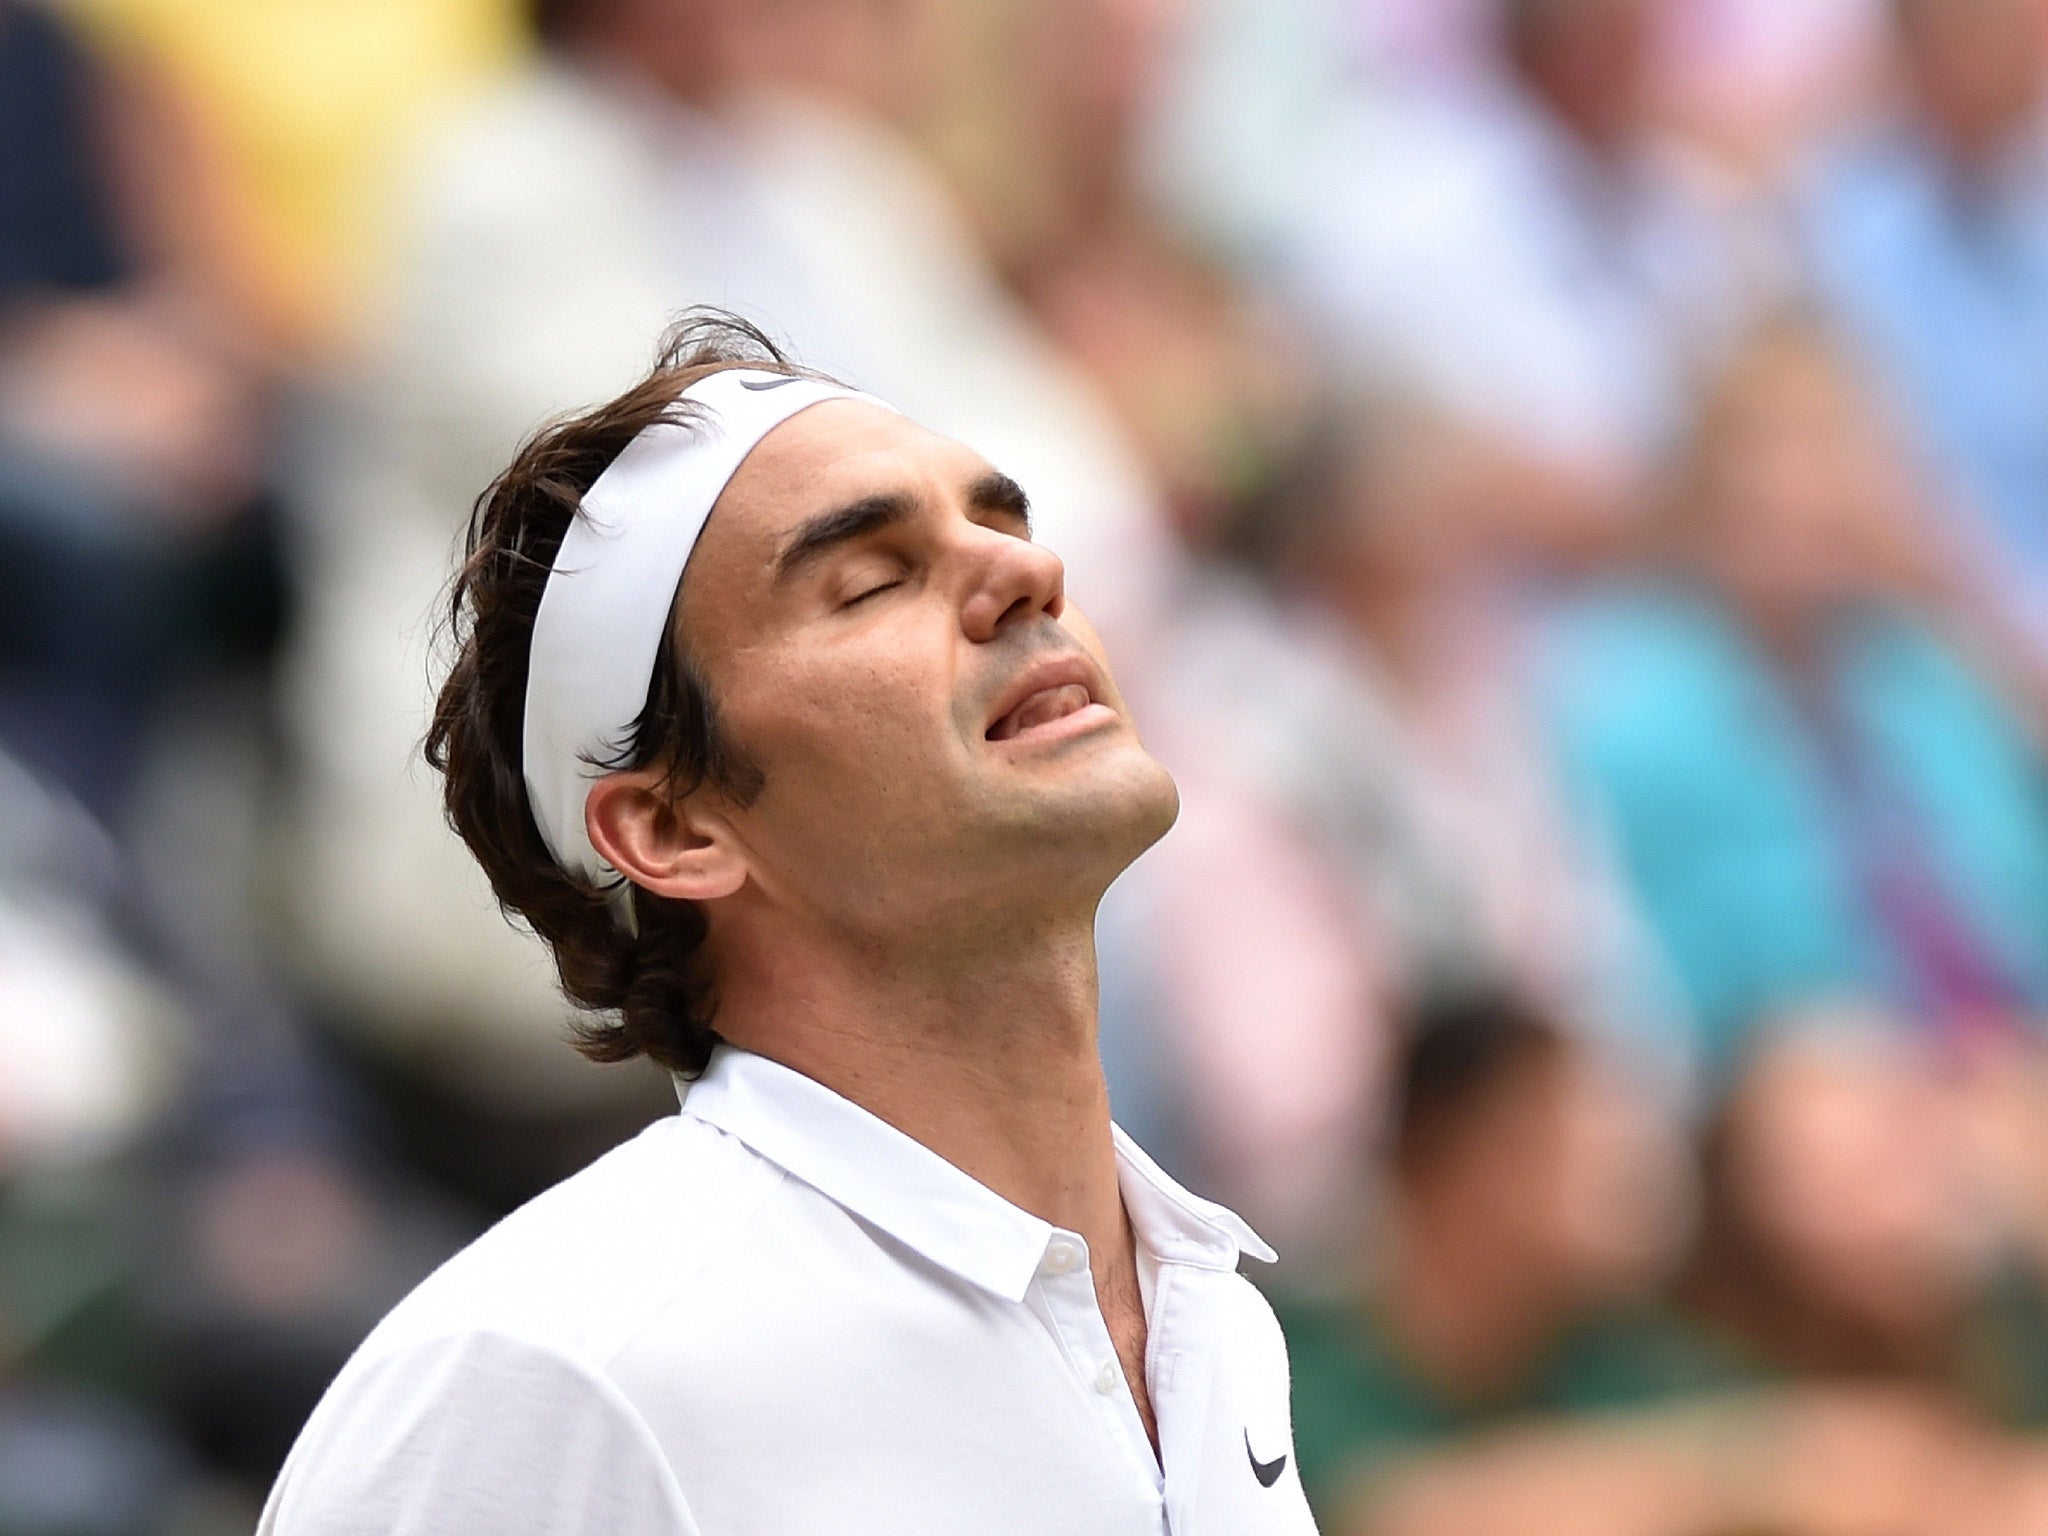 Roger Federer reacts to losing the first set to Milos Raonic